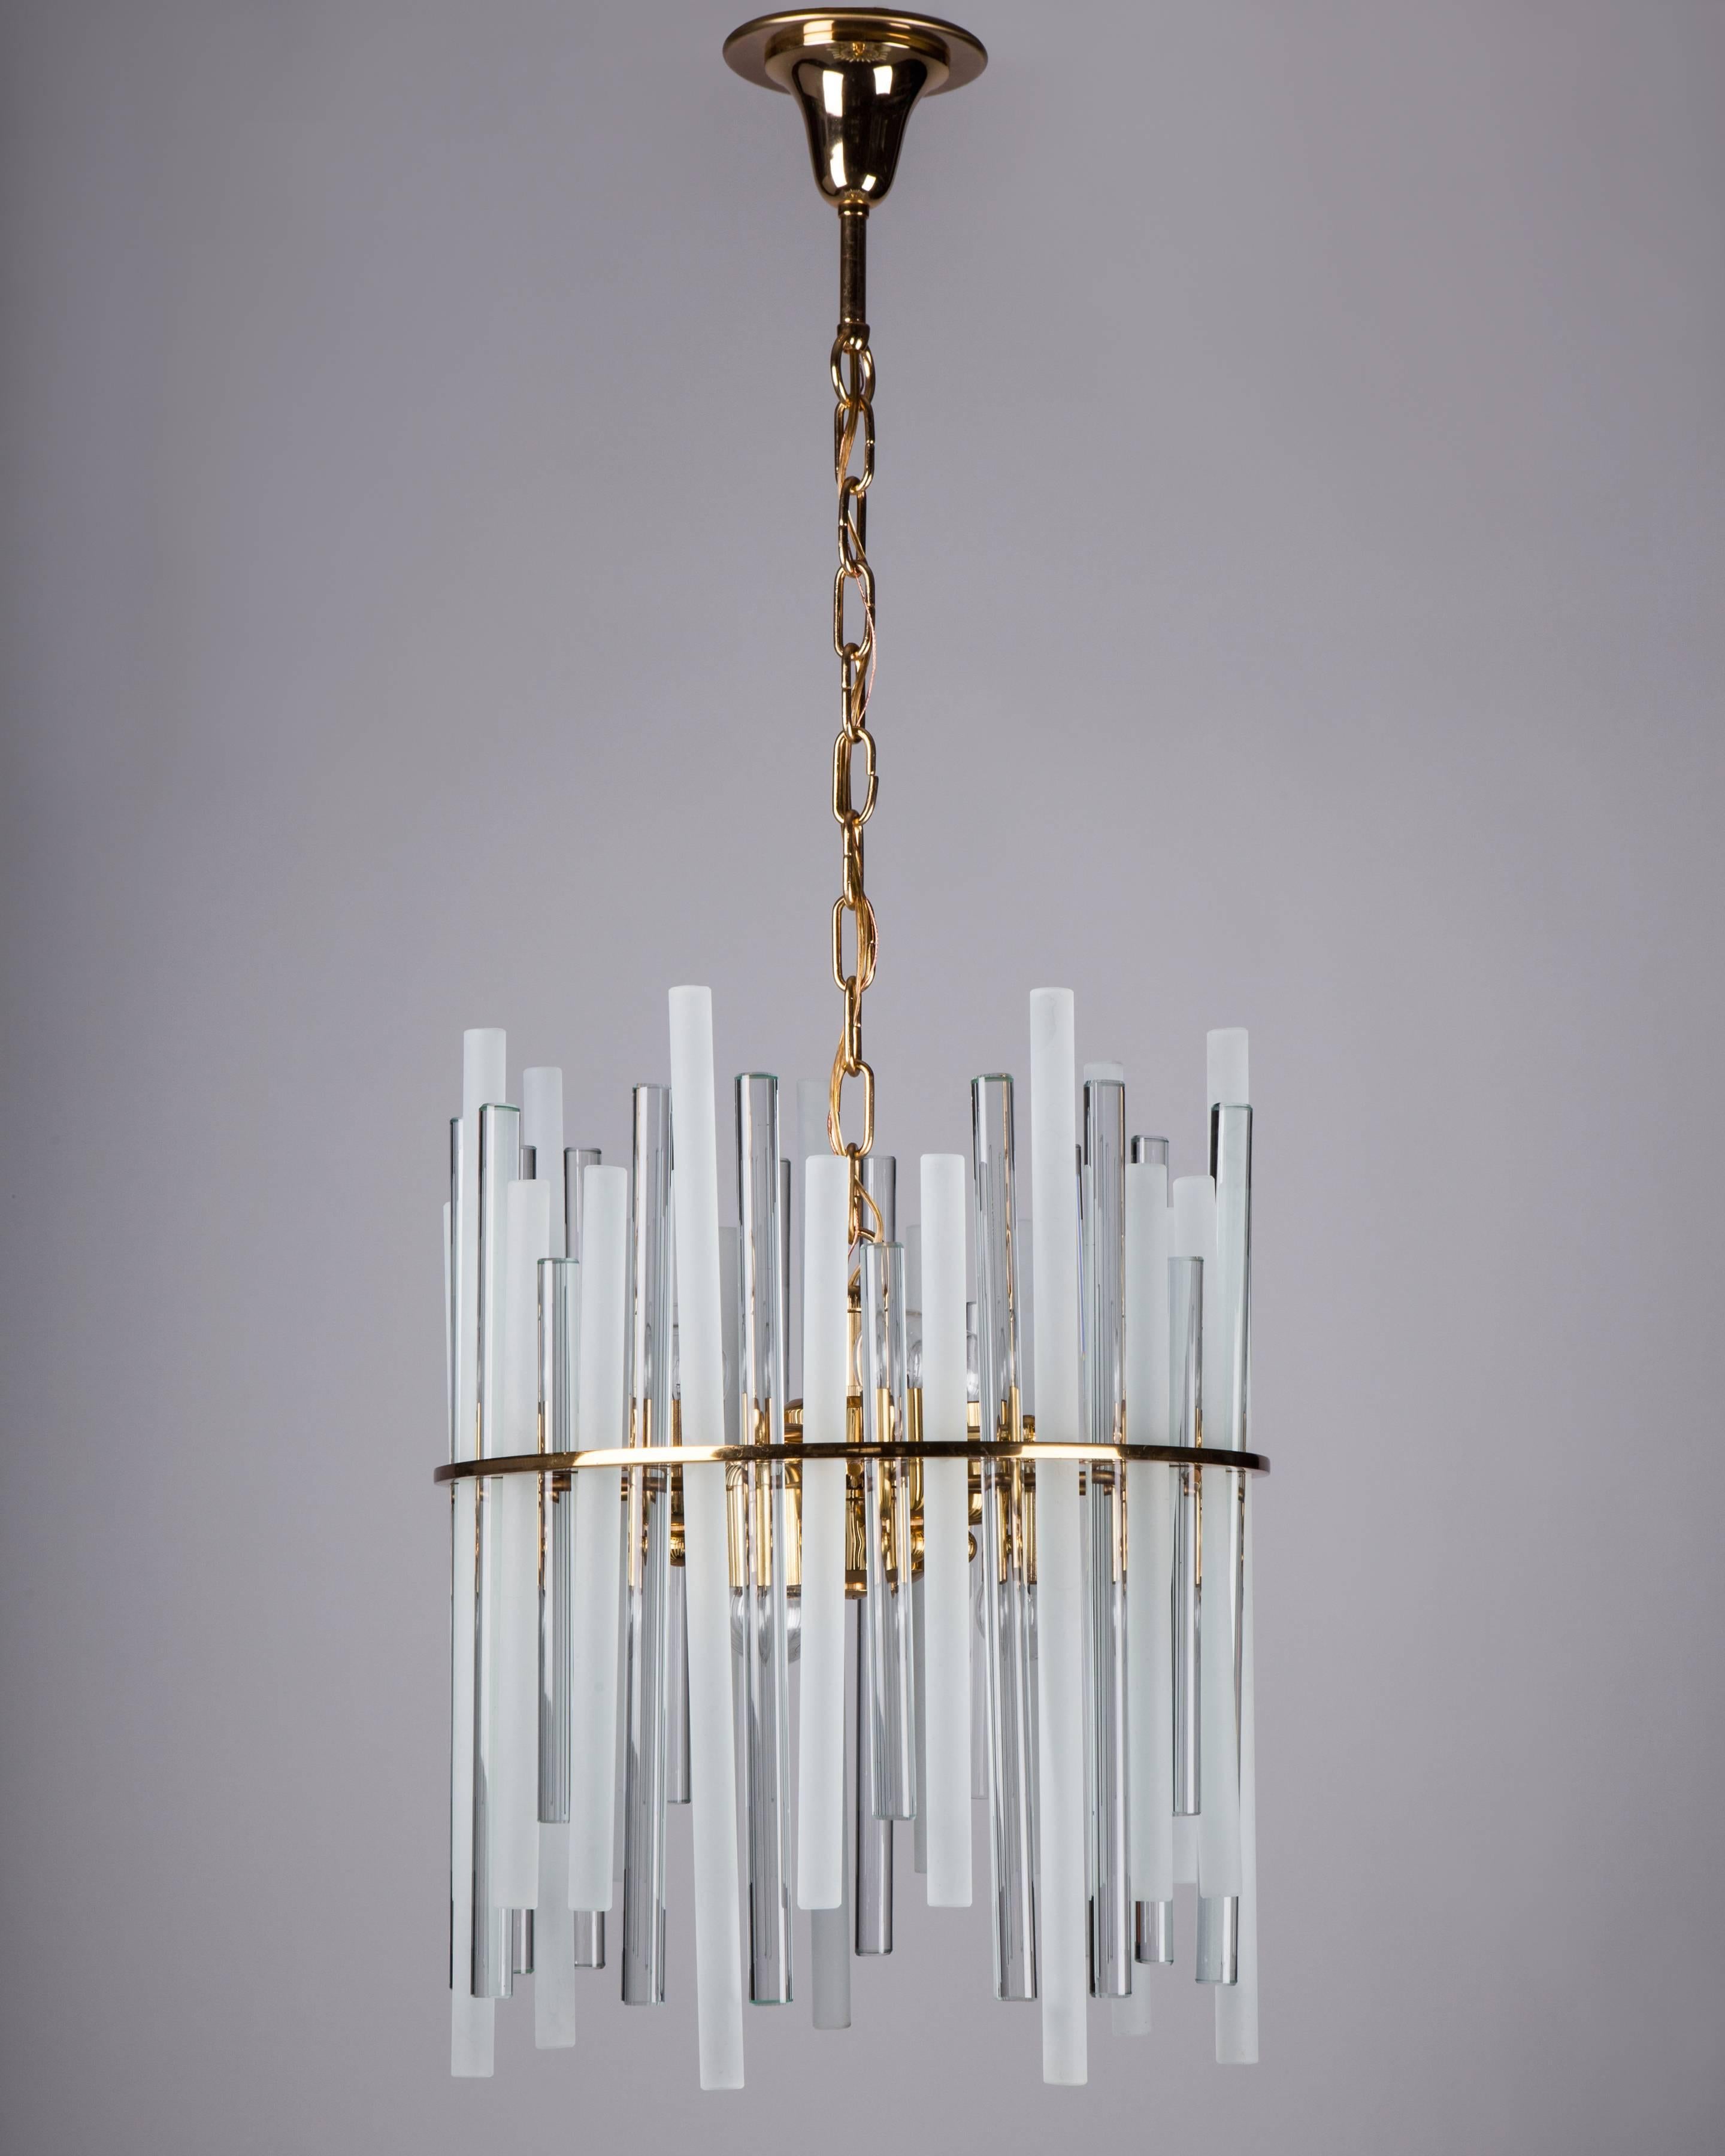 AHL4060
A vintage chandelier with frosted and clear cylindrical glass bars staggered on a gilded brass frame. Attributed to the German maker Christoph Palme. Due to the antique nature of this fixture, there may be some nicks or imperfections in the